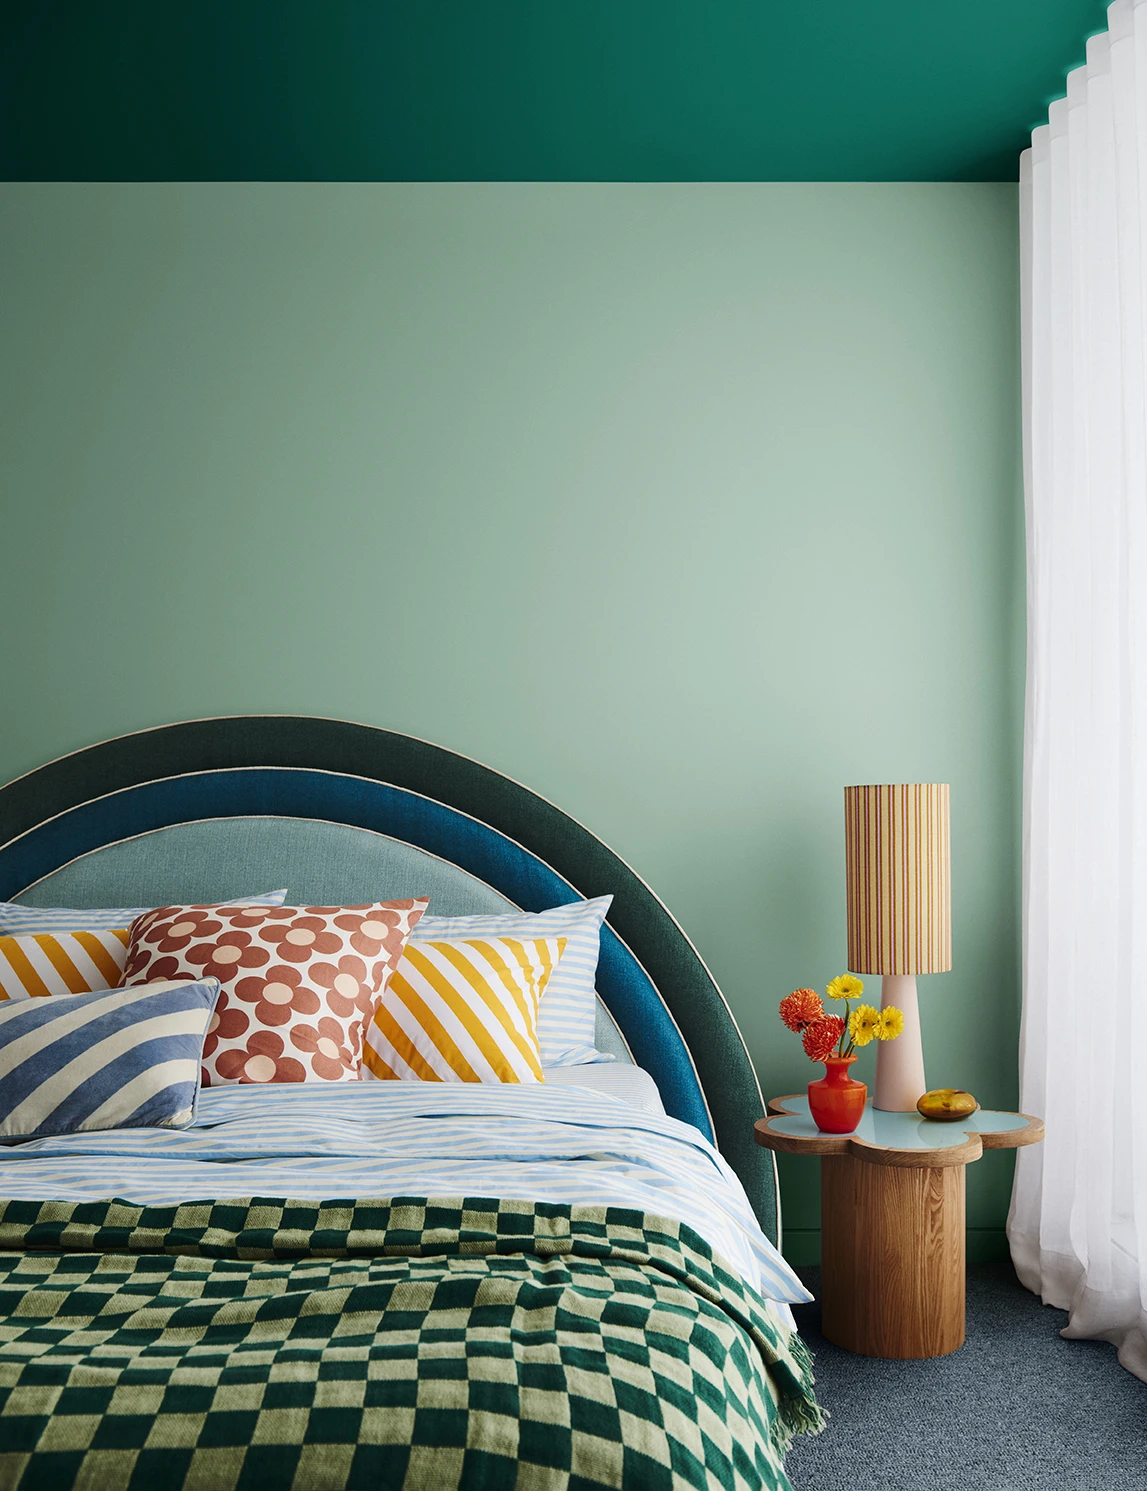 Green bedroom with check quilt and arched bedhead